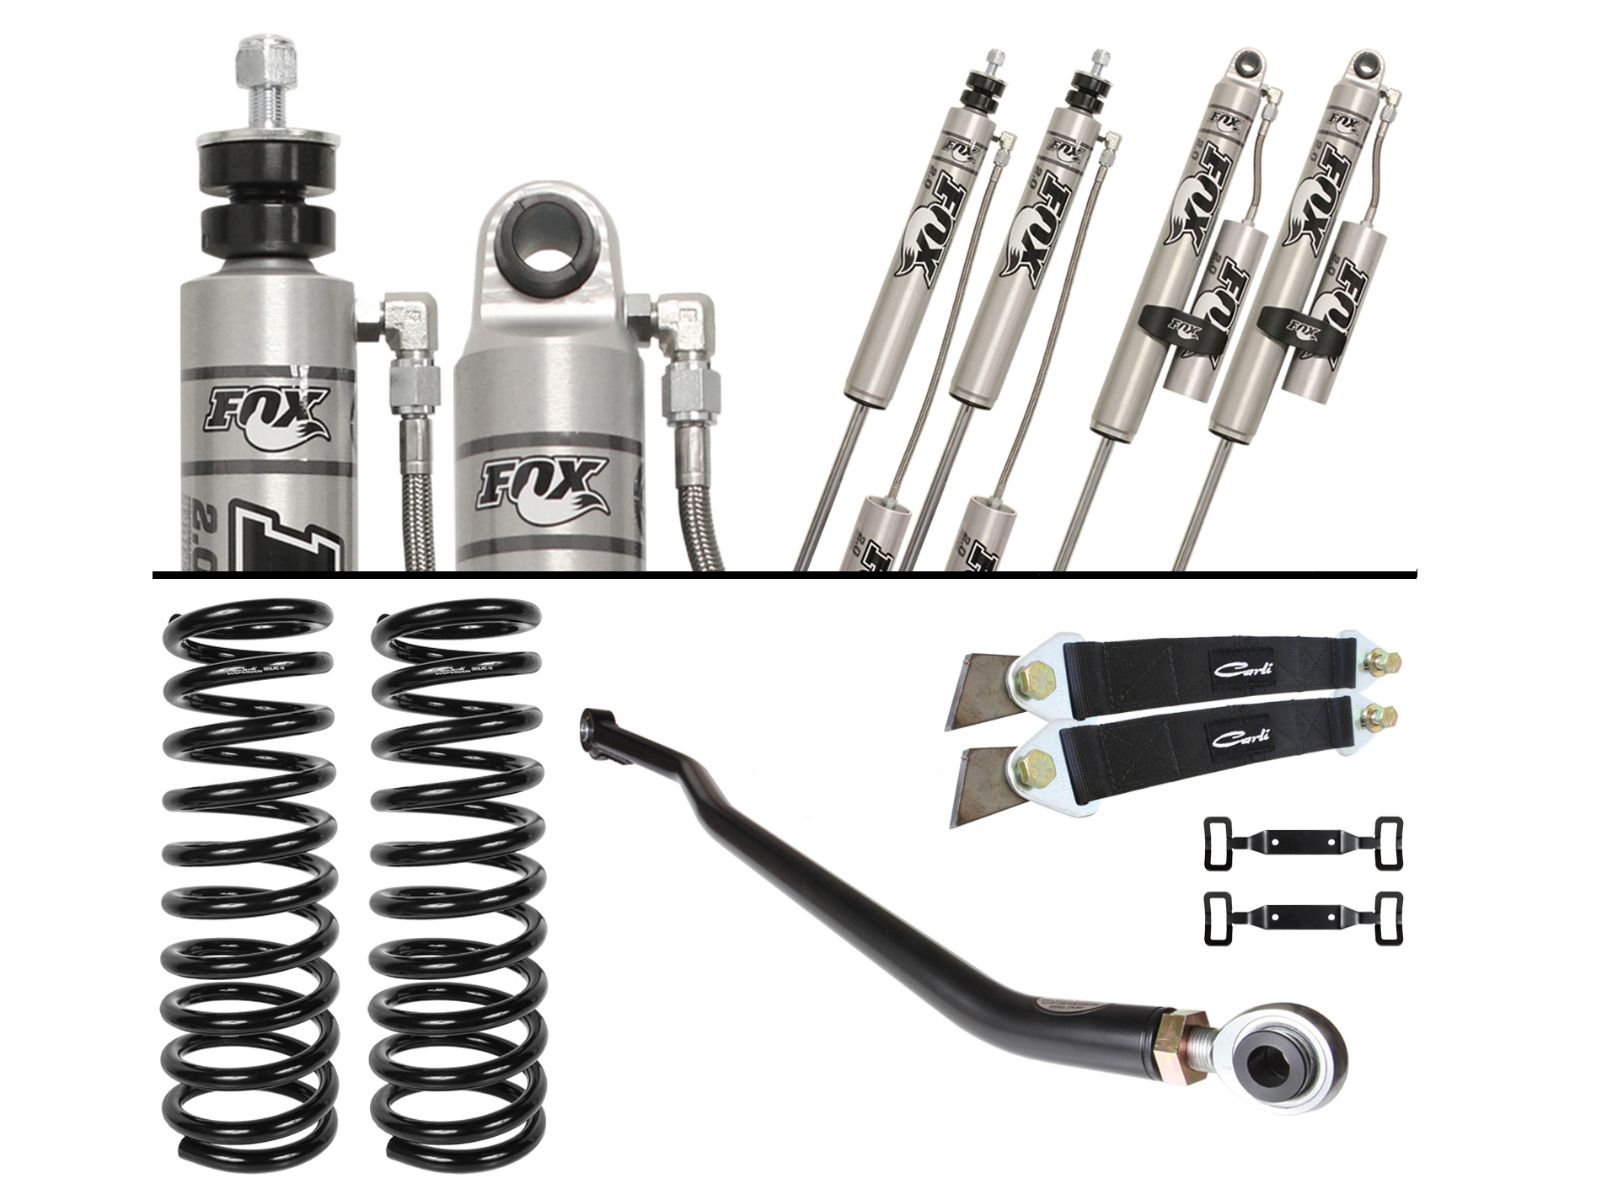 3" 2003-2009 Dodge Ram 2500 4wd (w/Diesel Engine) Backcountry Lift System by Carli Suspension